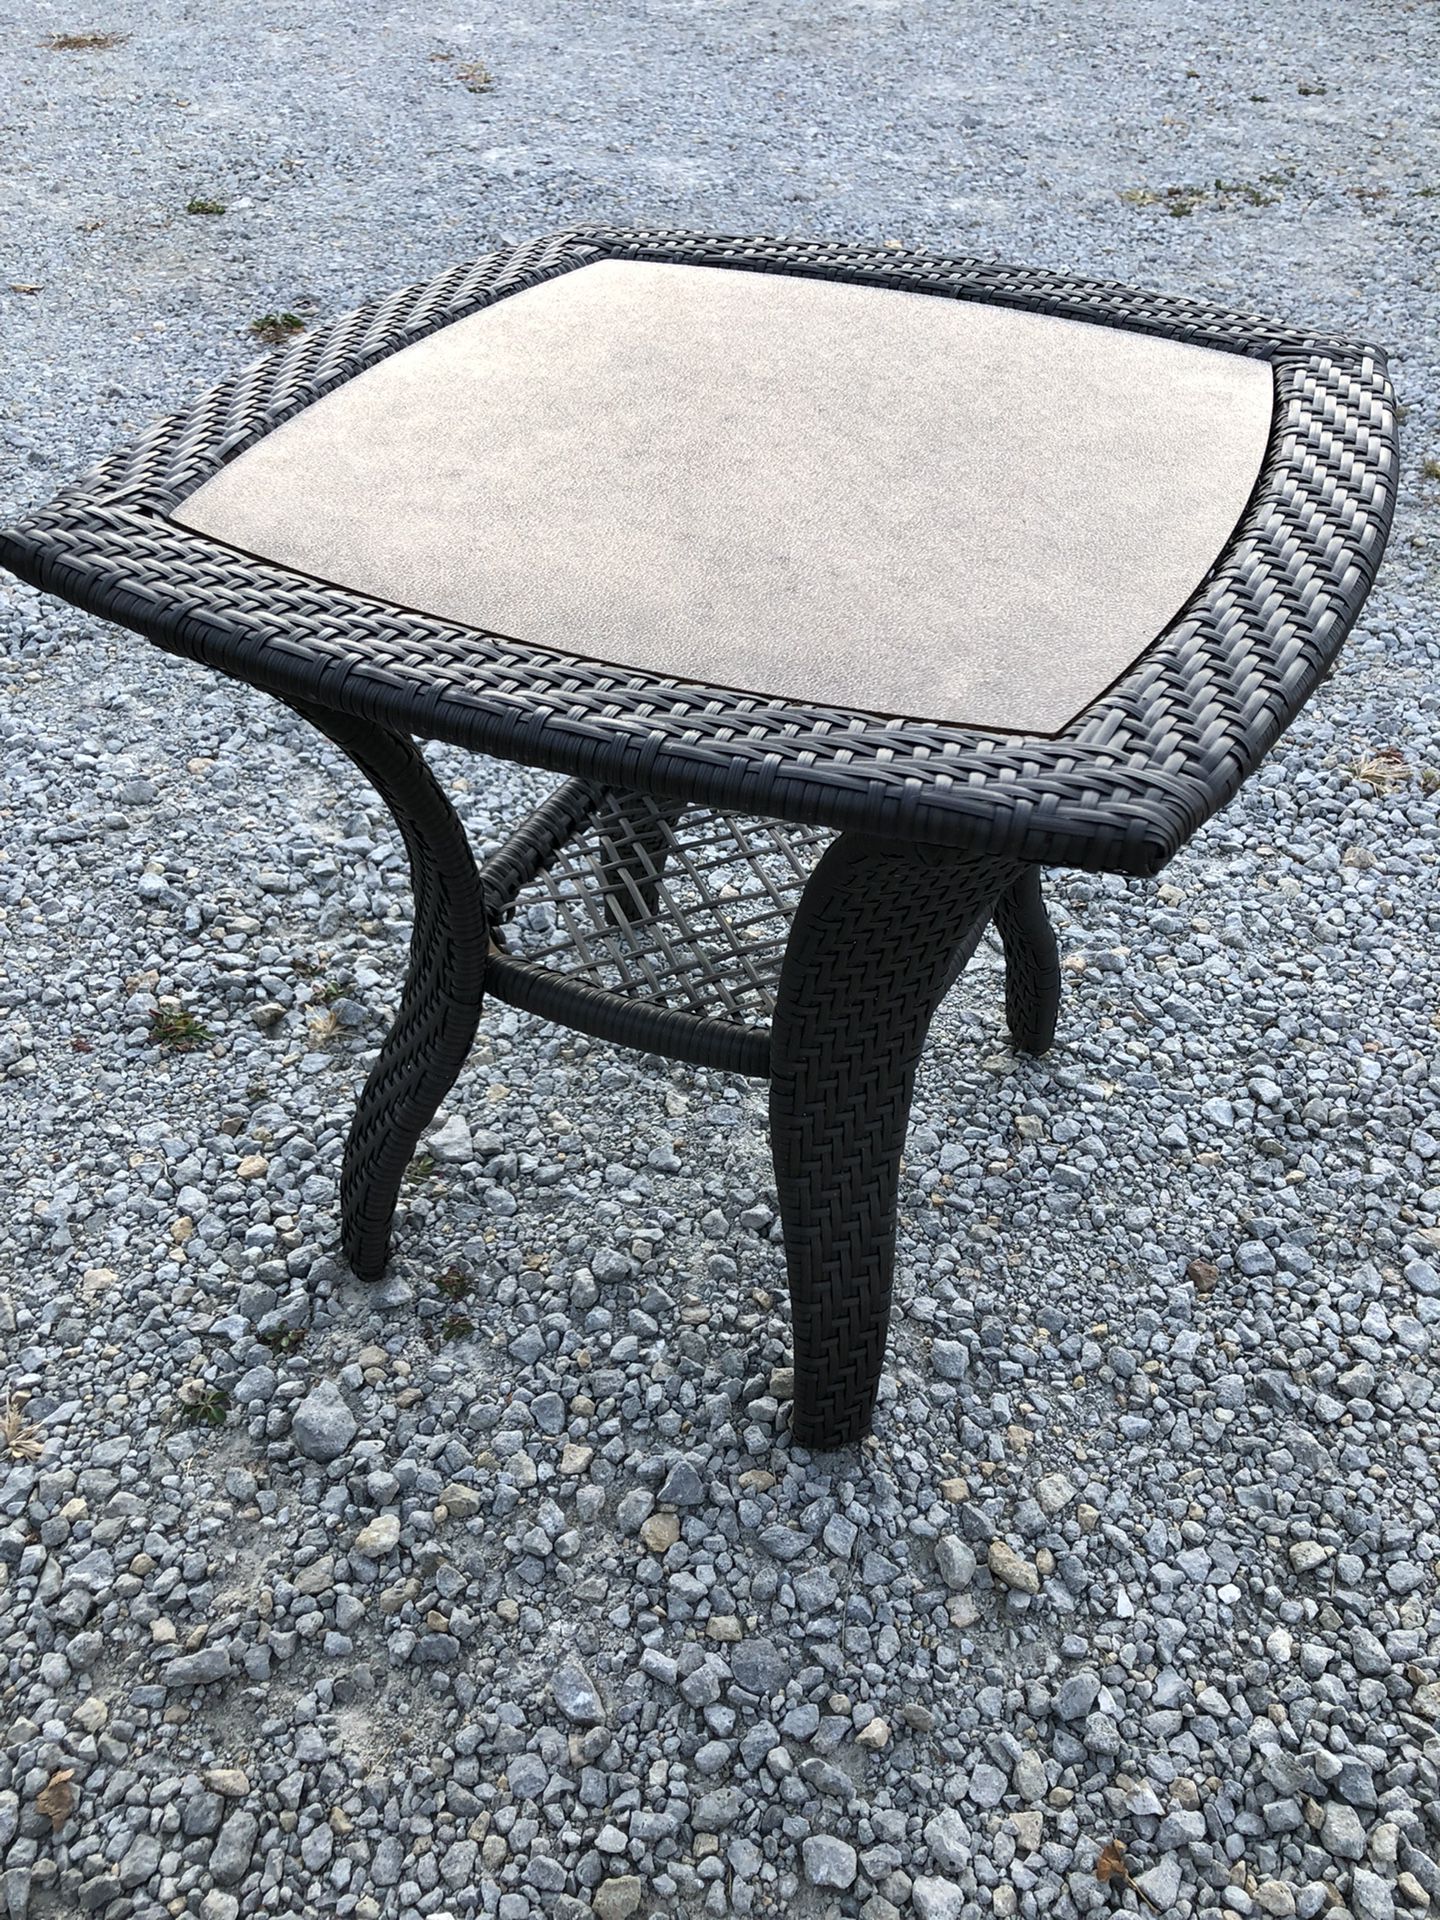 Wicker and glass side table